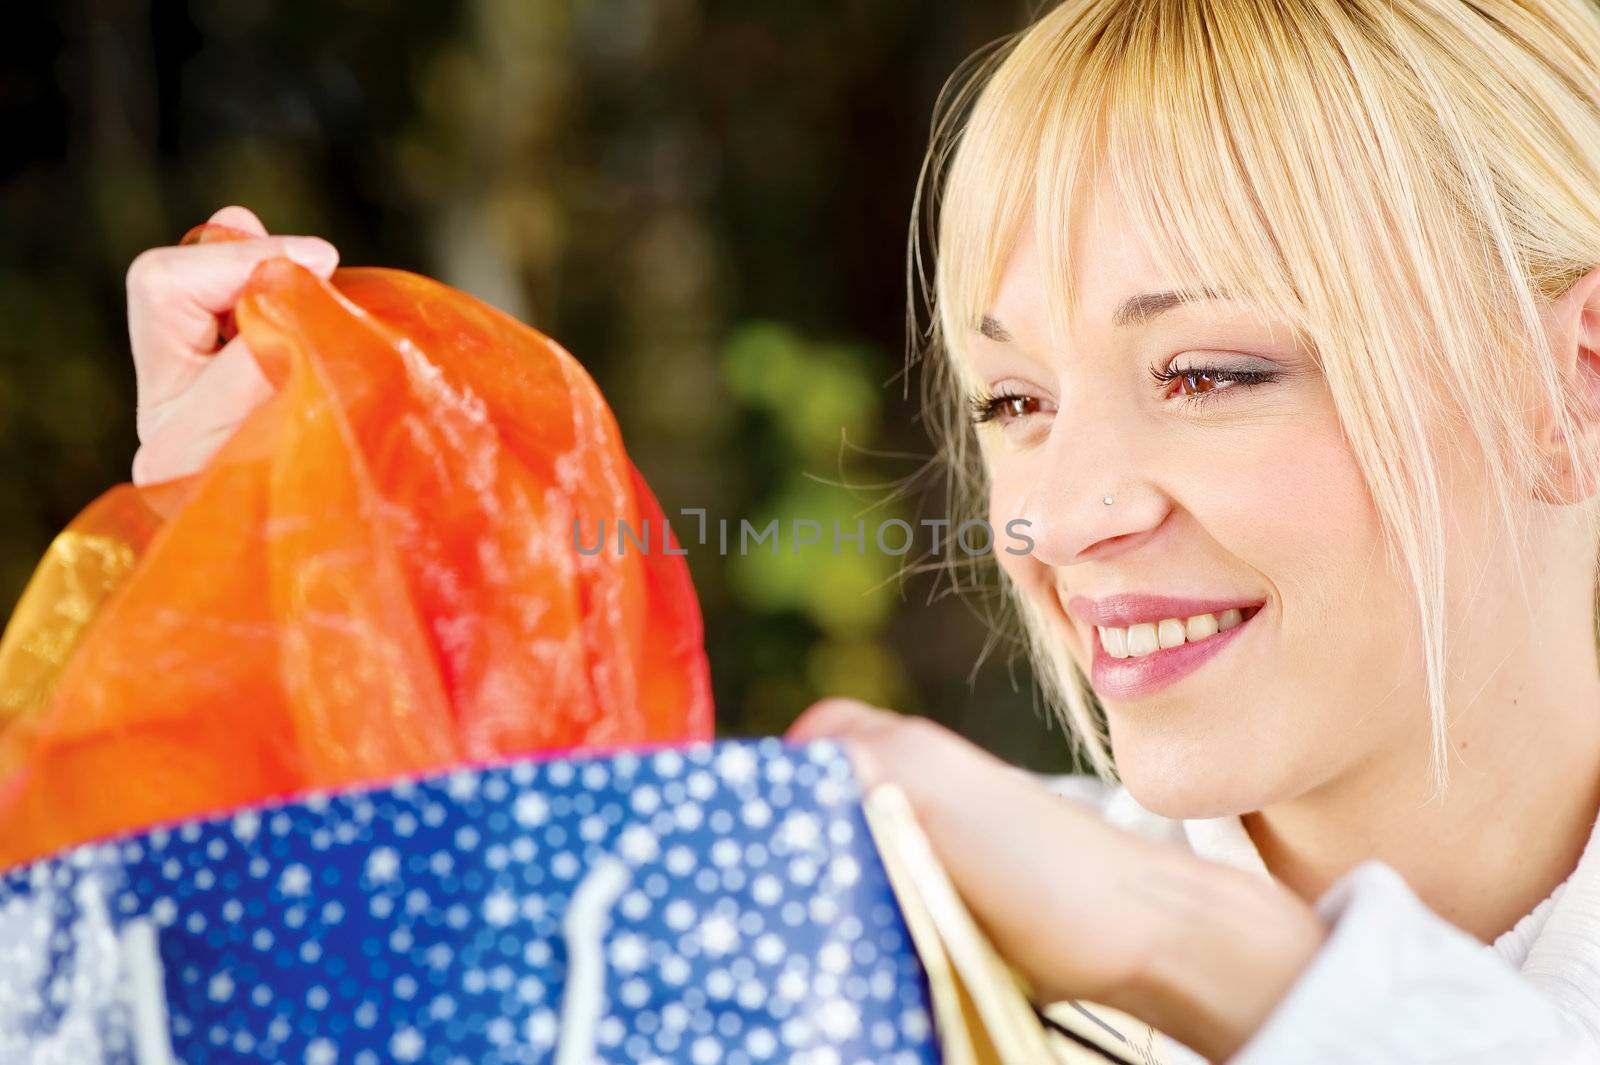 Woman looking at bag content after shopping, outdoor